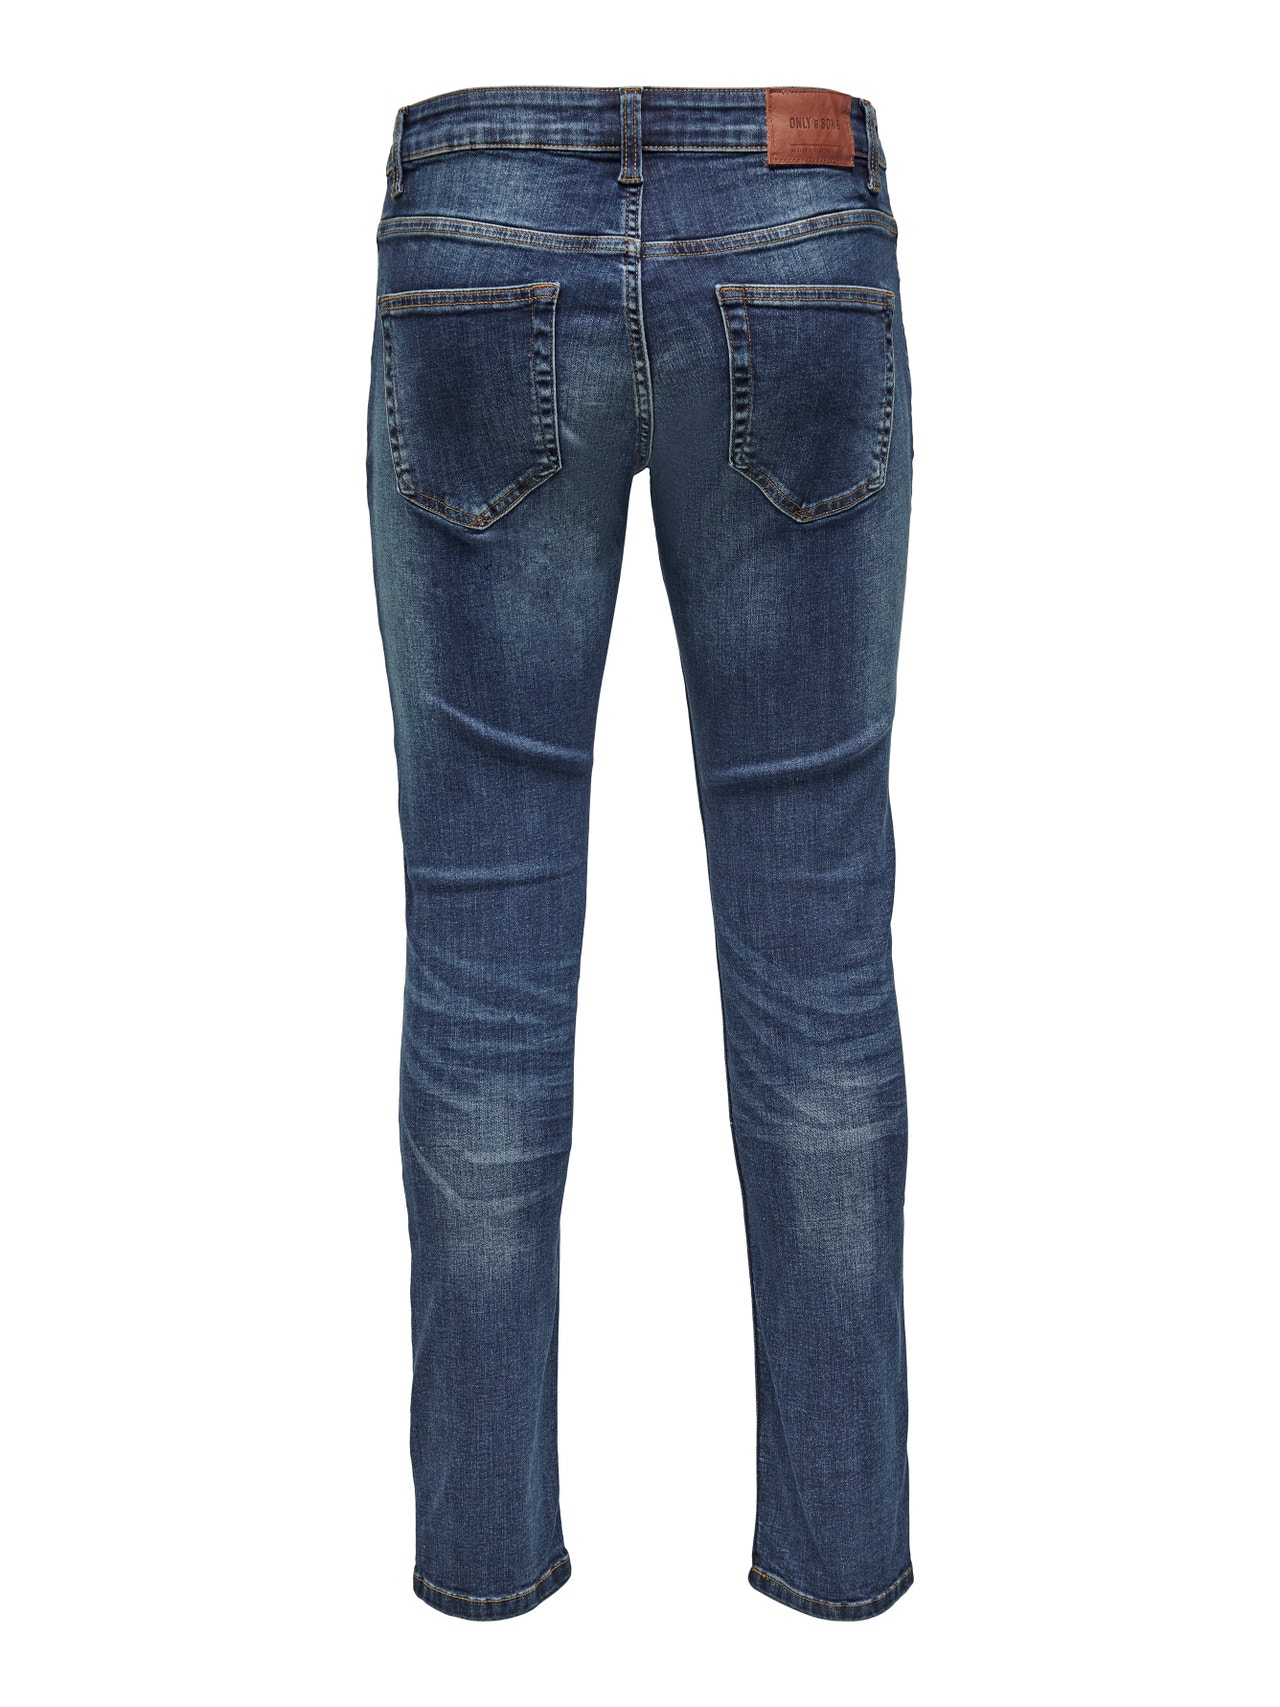 ONLY & SONS Jeans Regular Fit Taille moyenne -Medium Blue Denim - 22005076